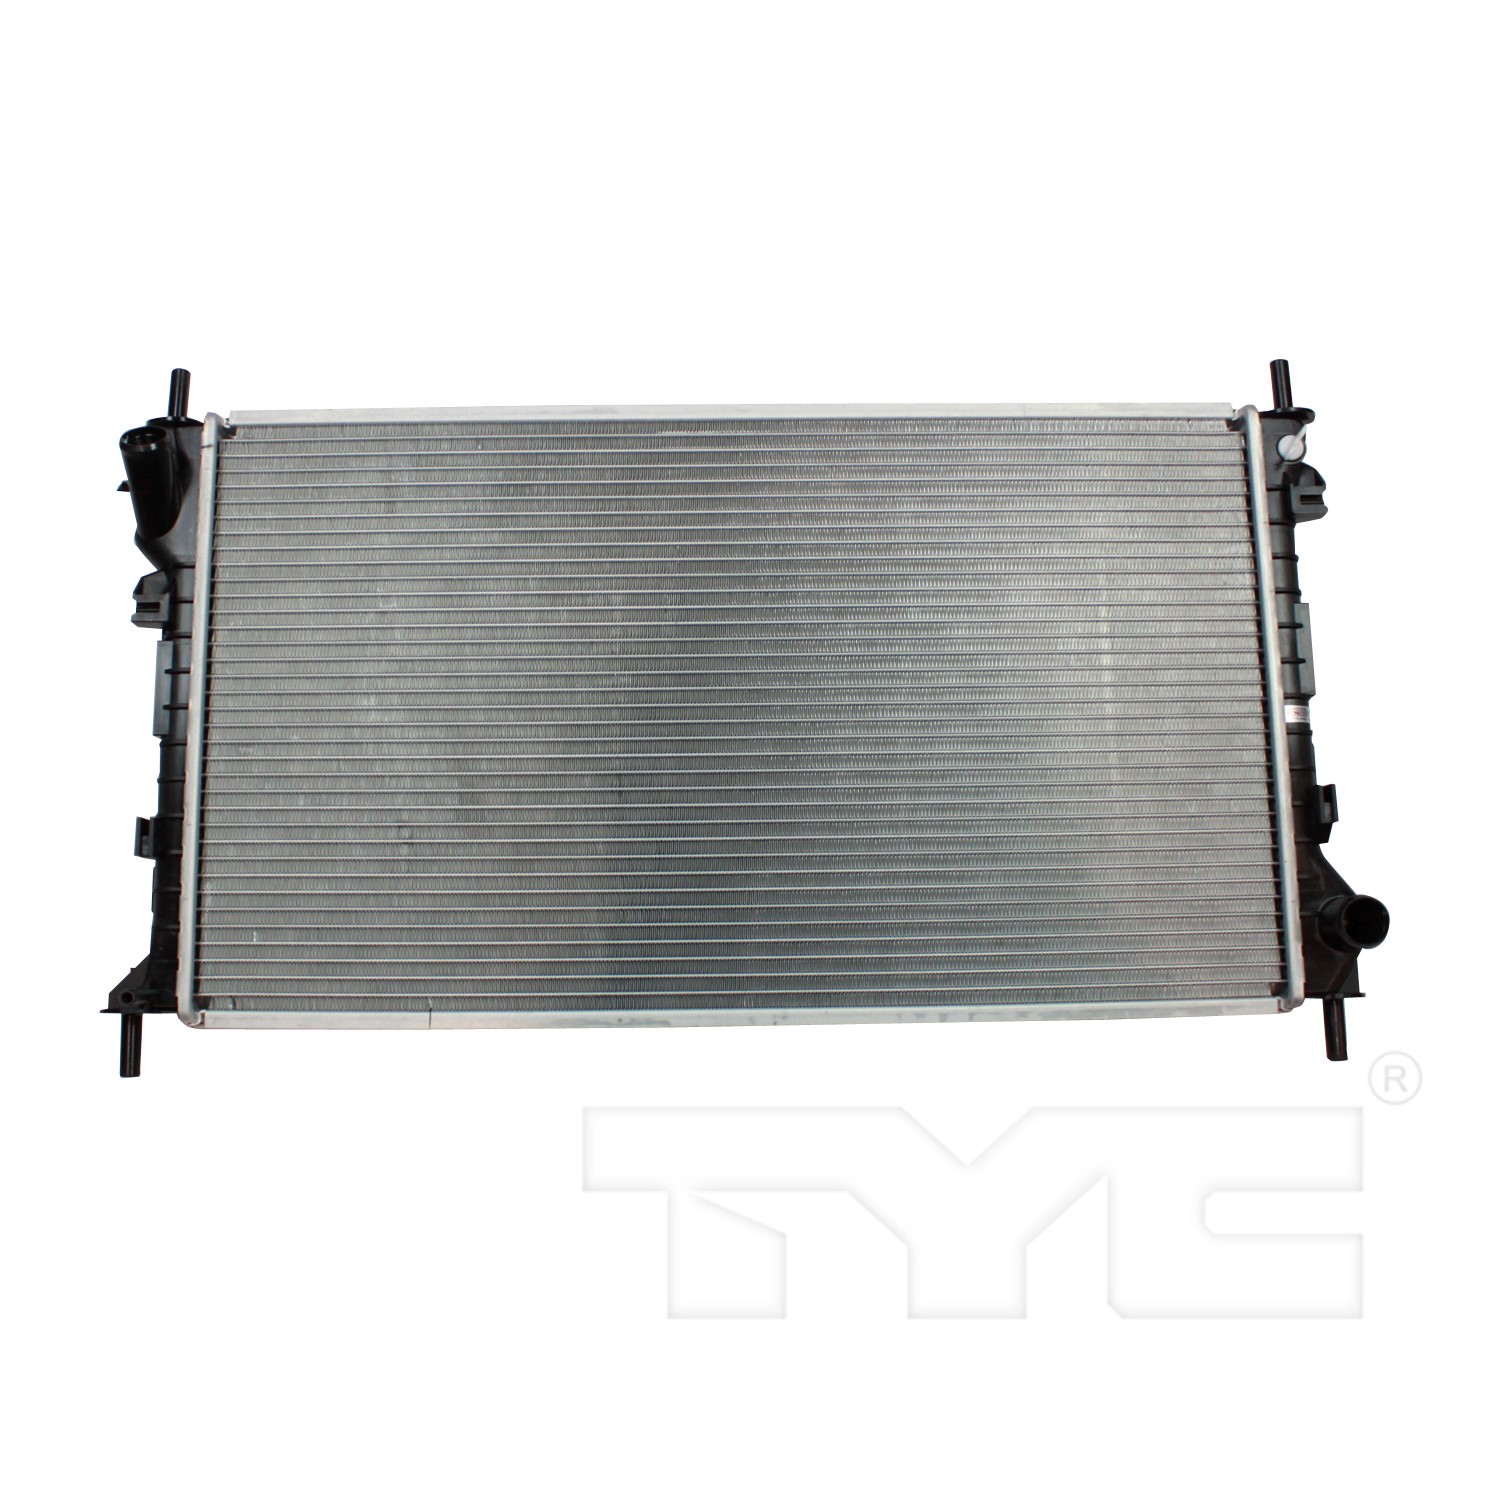 Aftermarket RADIATORS for FORD - TRANSIT CONNECT, TRANSIT CONNECT,10-13,Radiator assembly